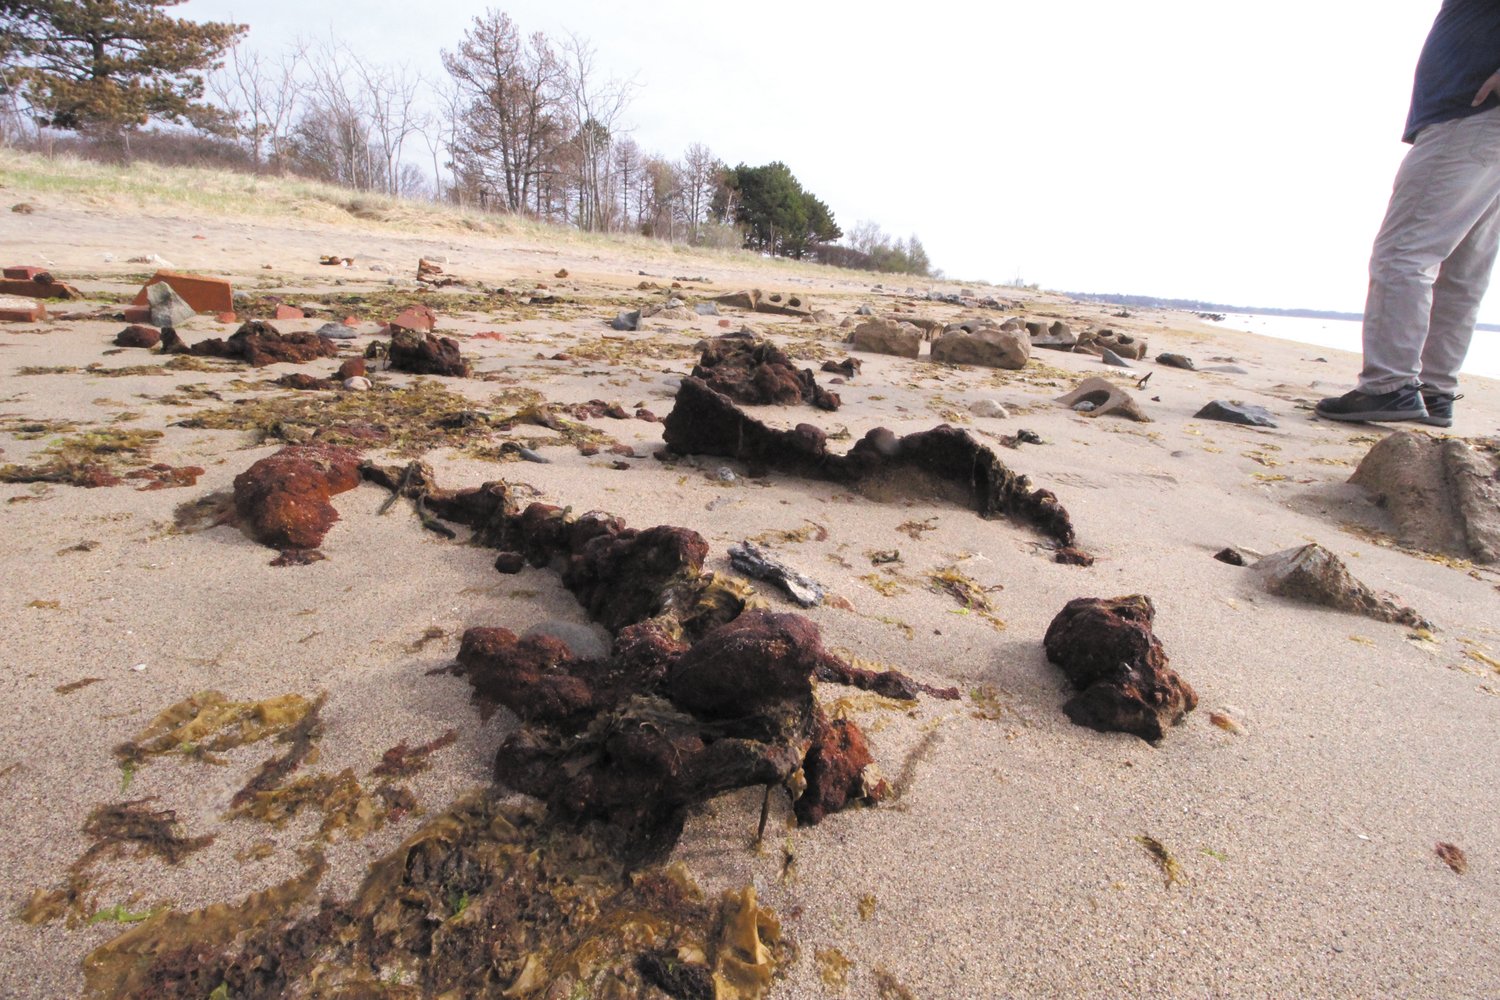 EXPOSED: With the loss of an estimated two feet of sand over the winter, the foundations of homes washed away by the 1938 Hurricane have resurfaced on Conimicut beach.